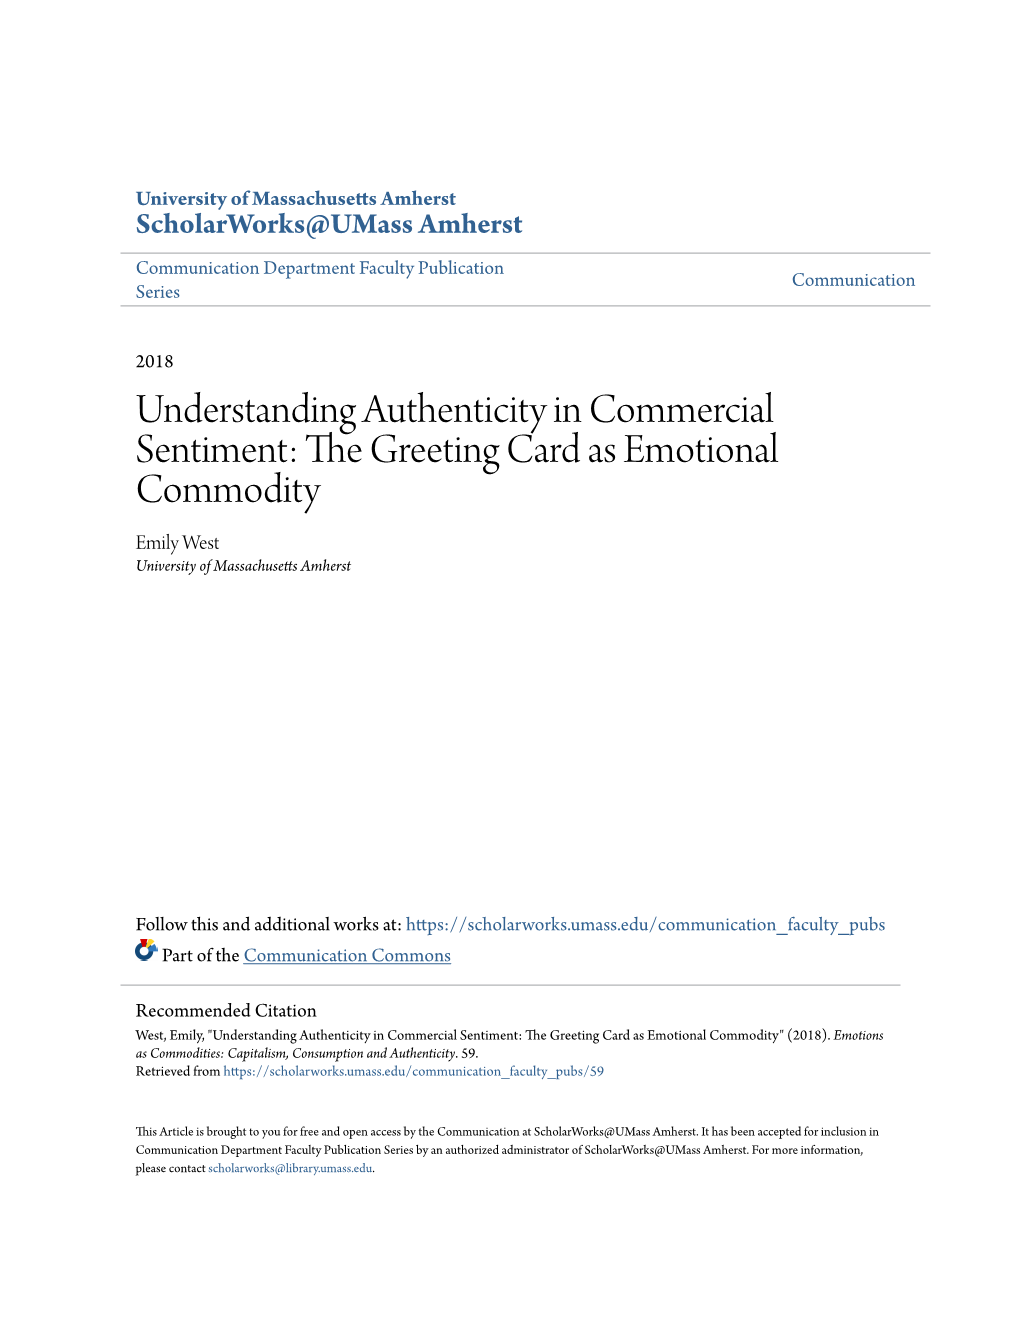 The Greeting Card As Emotional Commodity Emily West University of Massachusetts Amherst